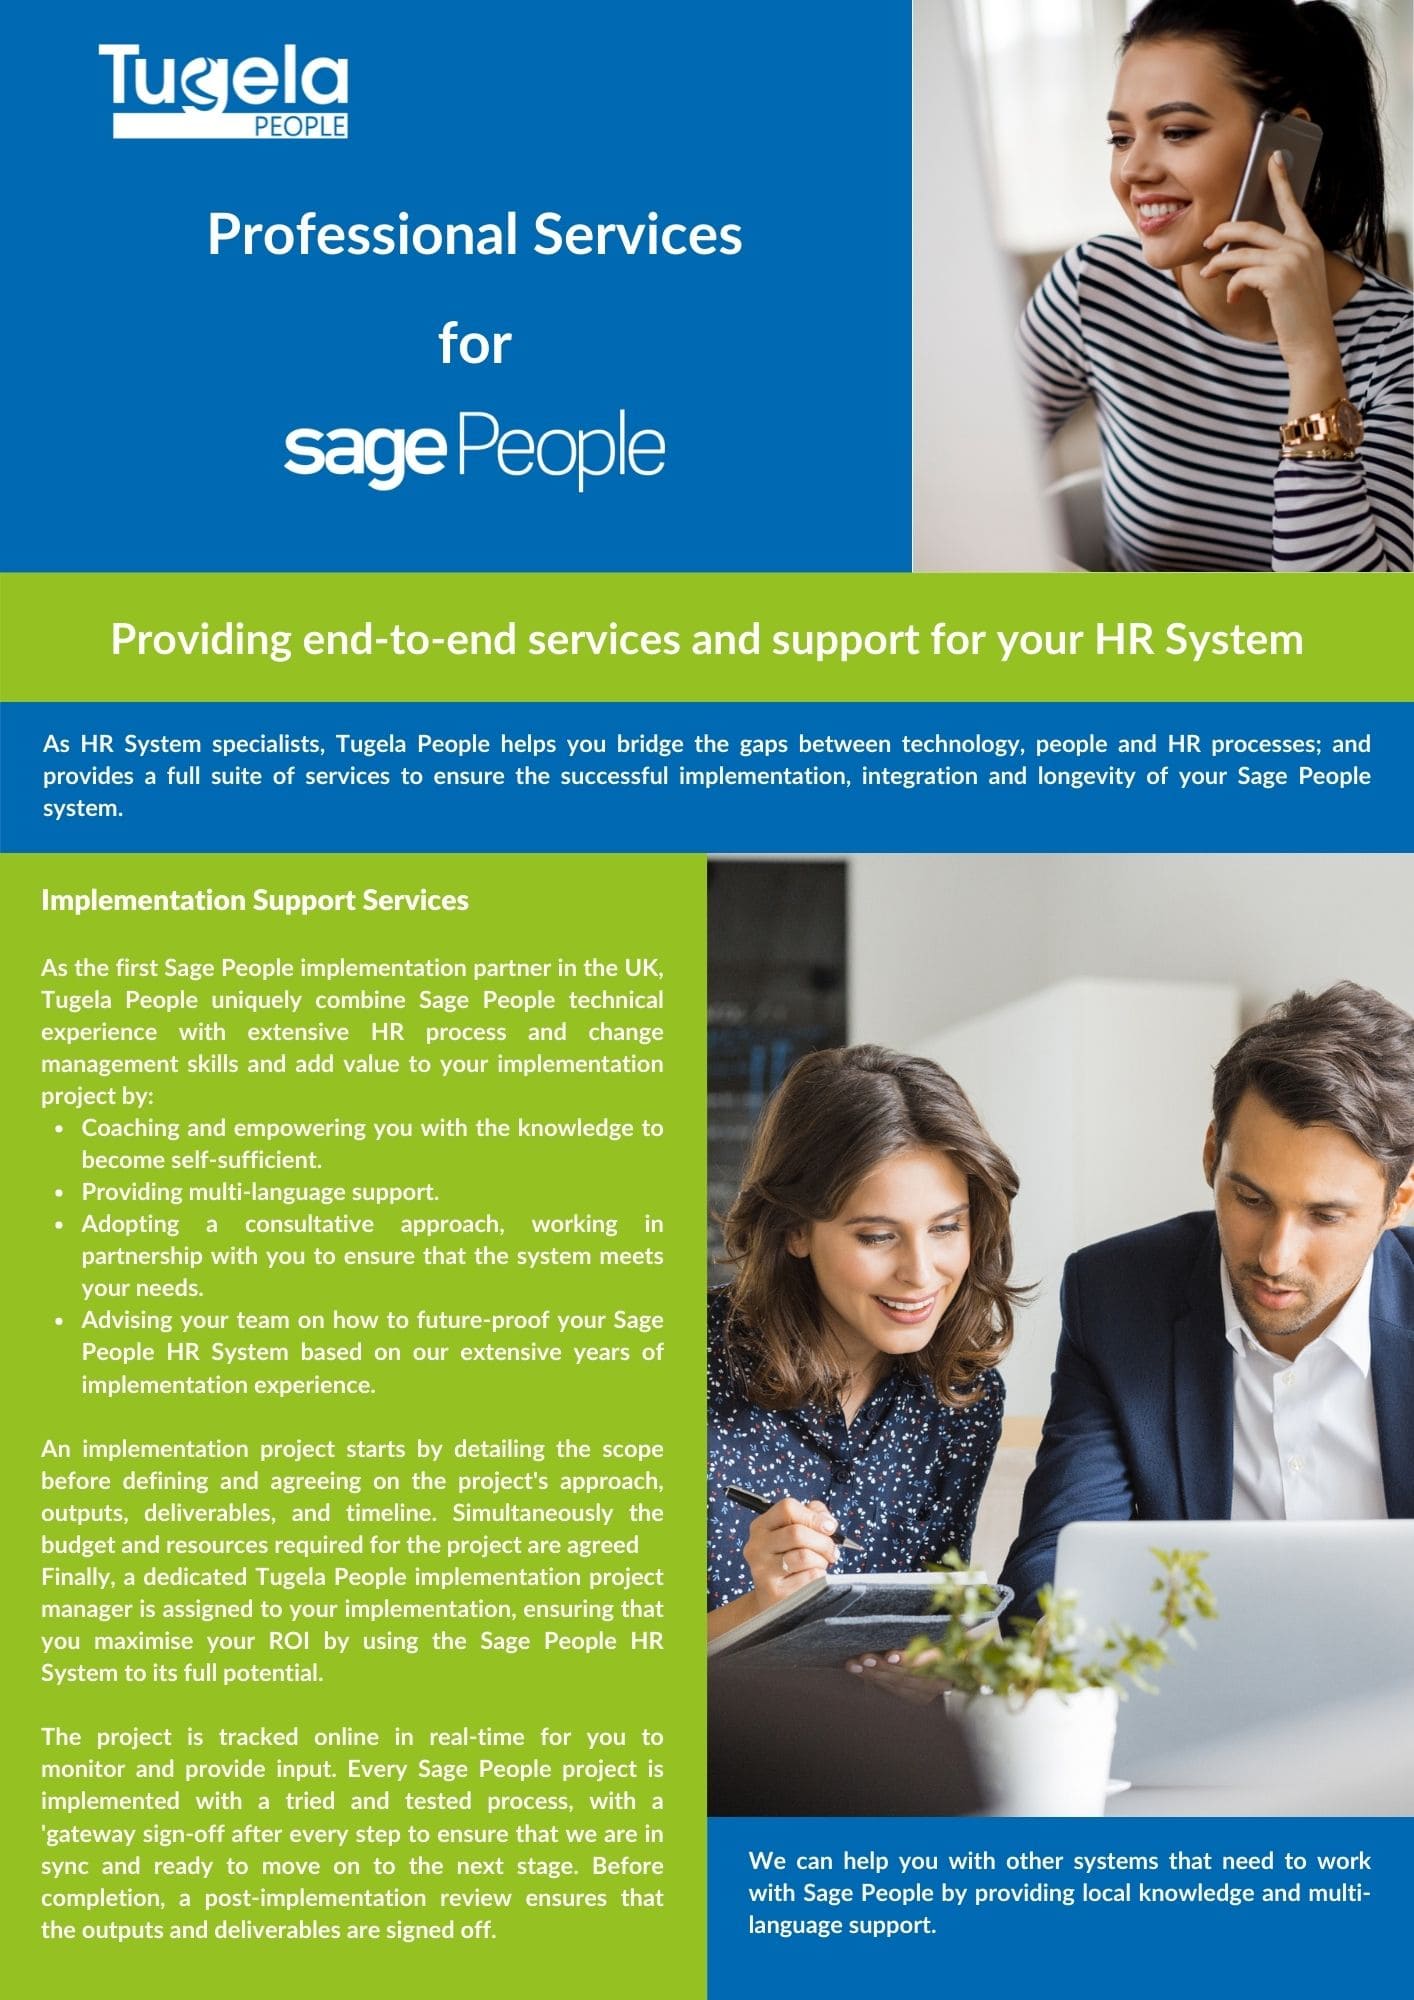 Professional Services for Sage People. Read more